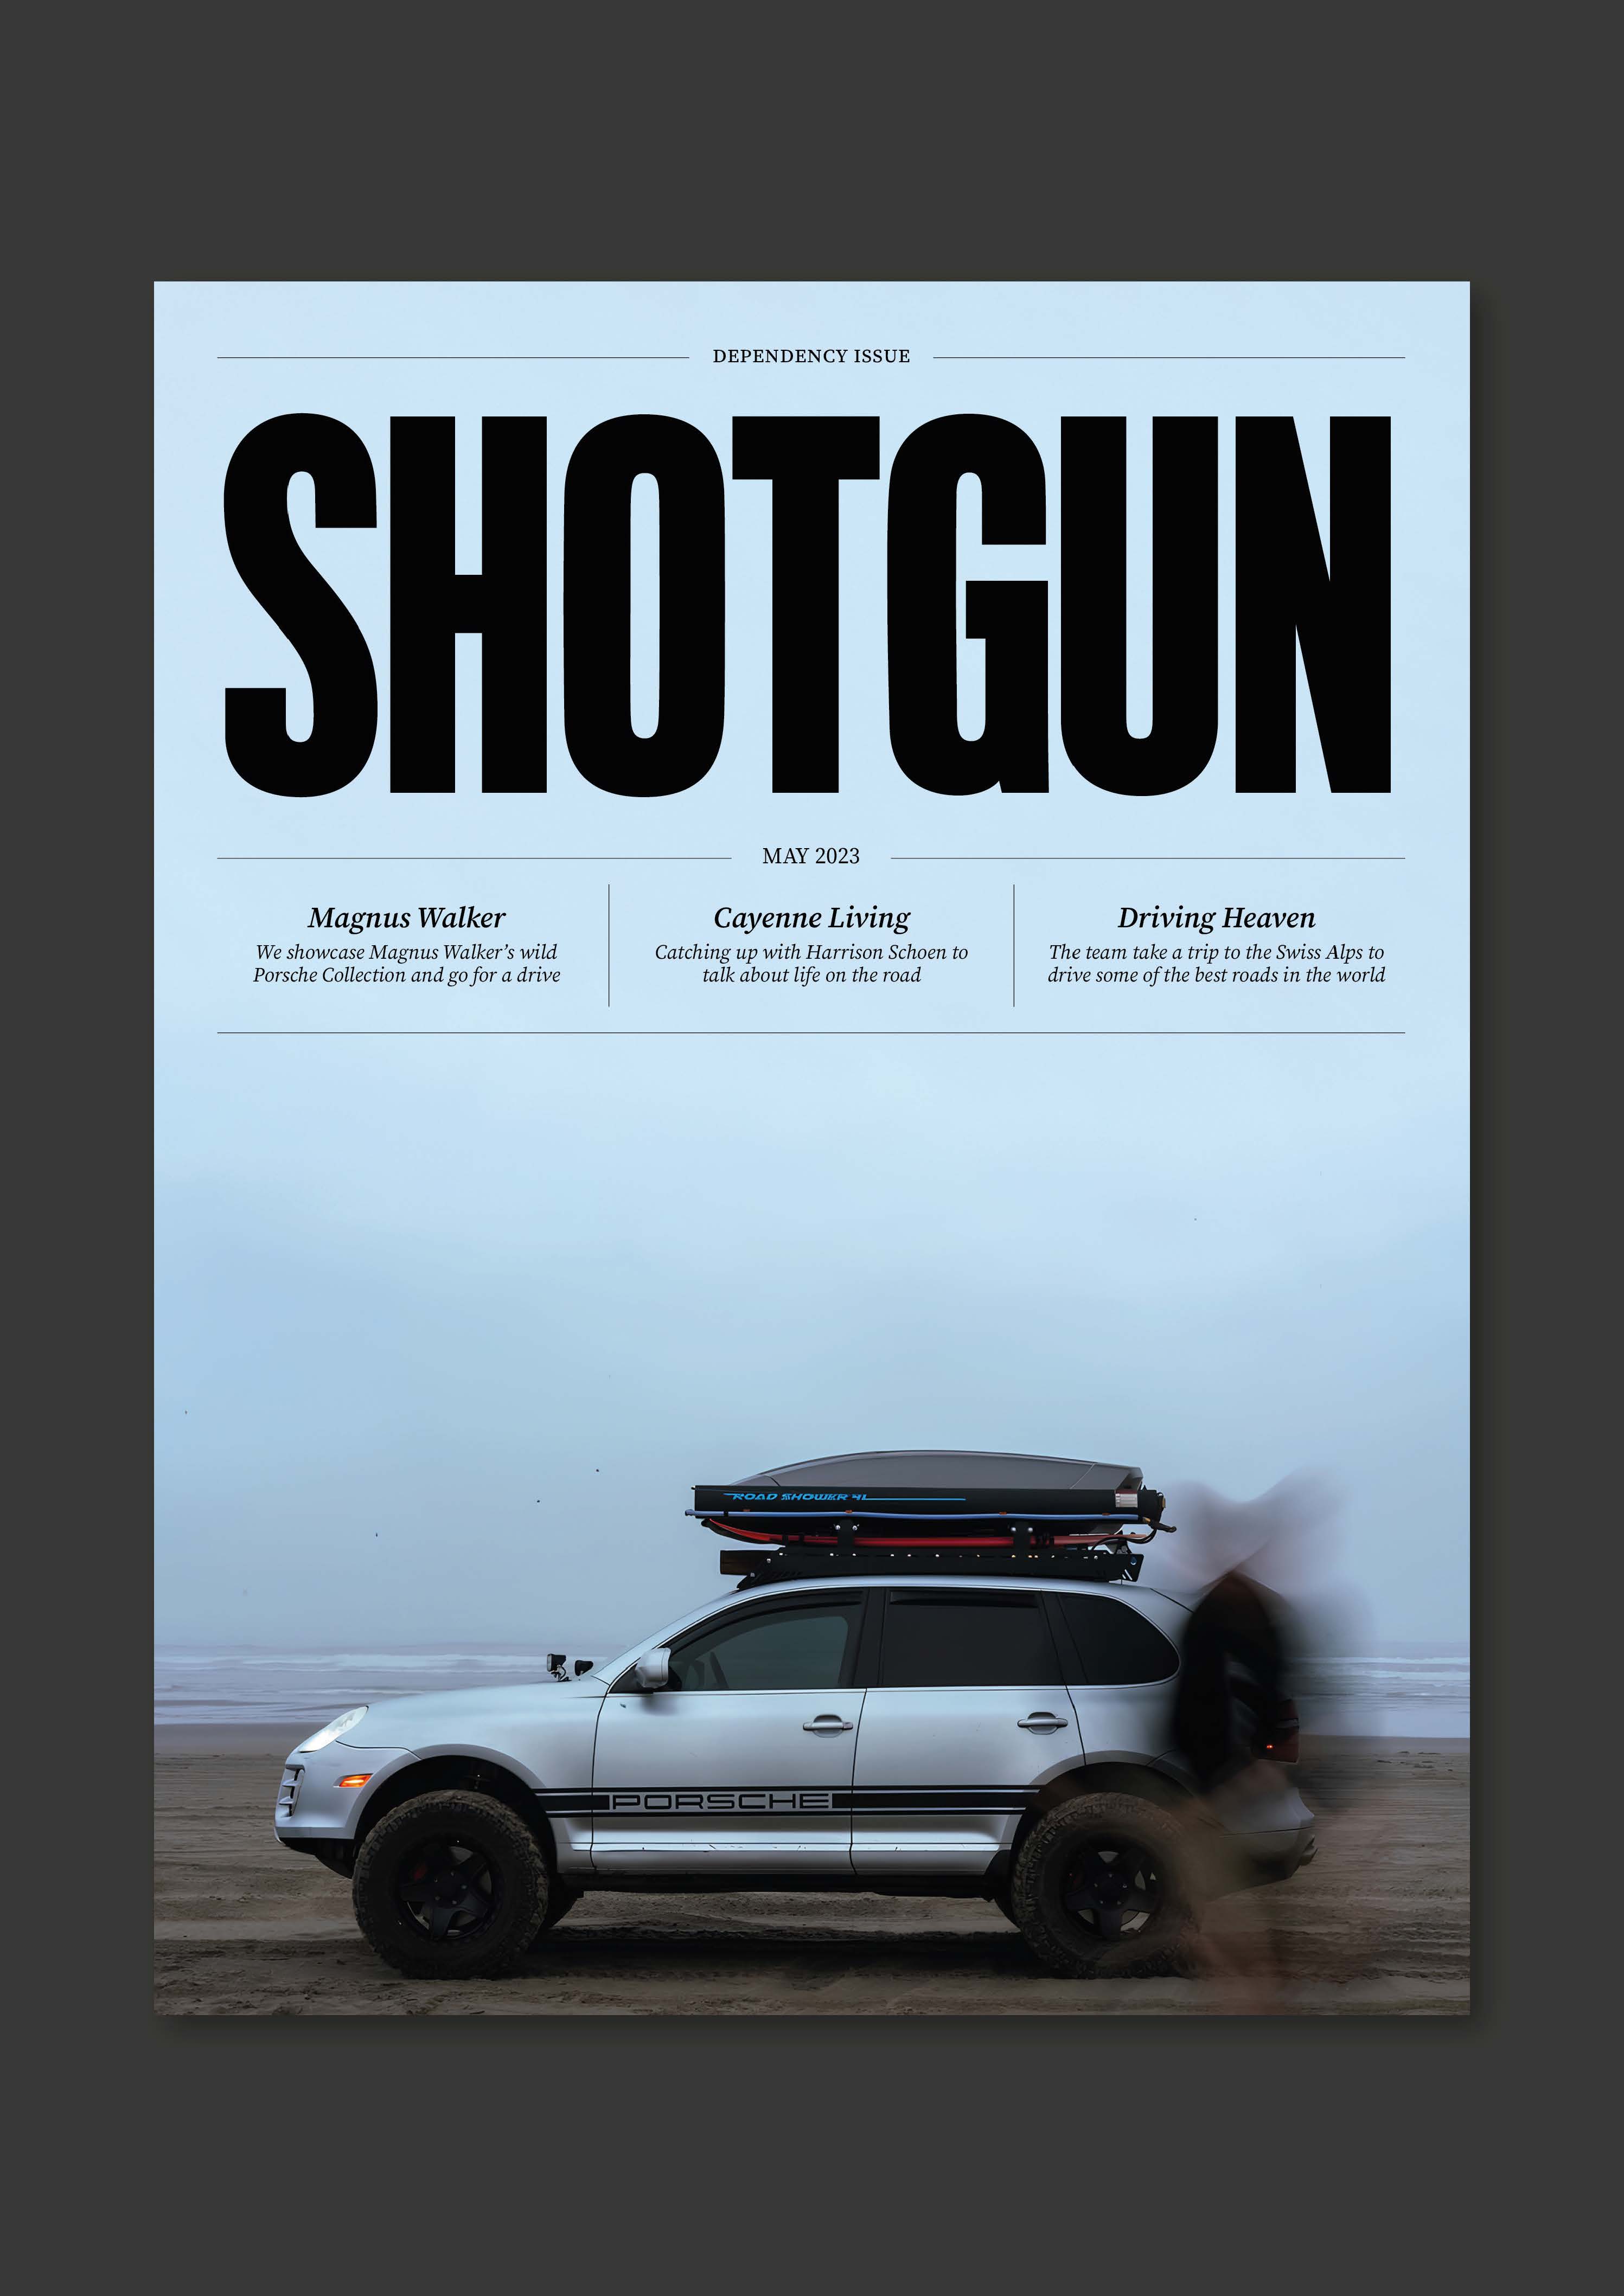 Shotgun Magazine Cover by Ben Dale, showing large bold type and high quality car imagery.